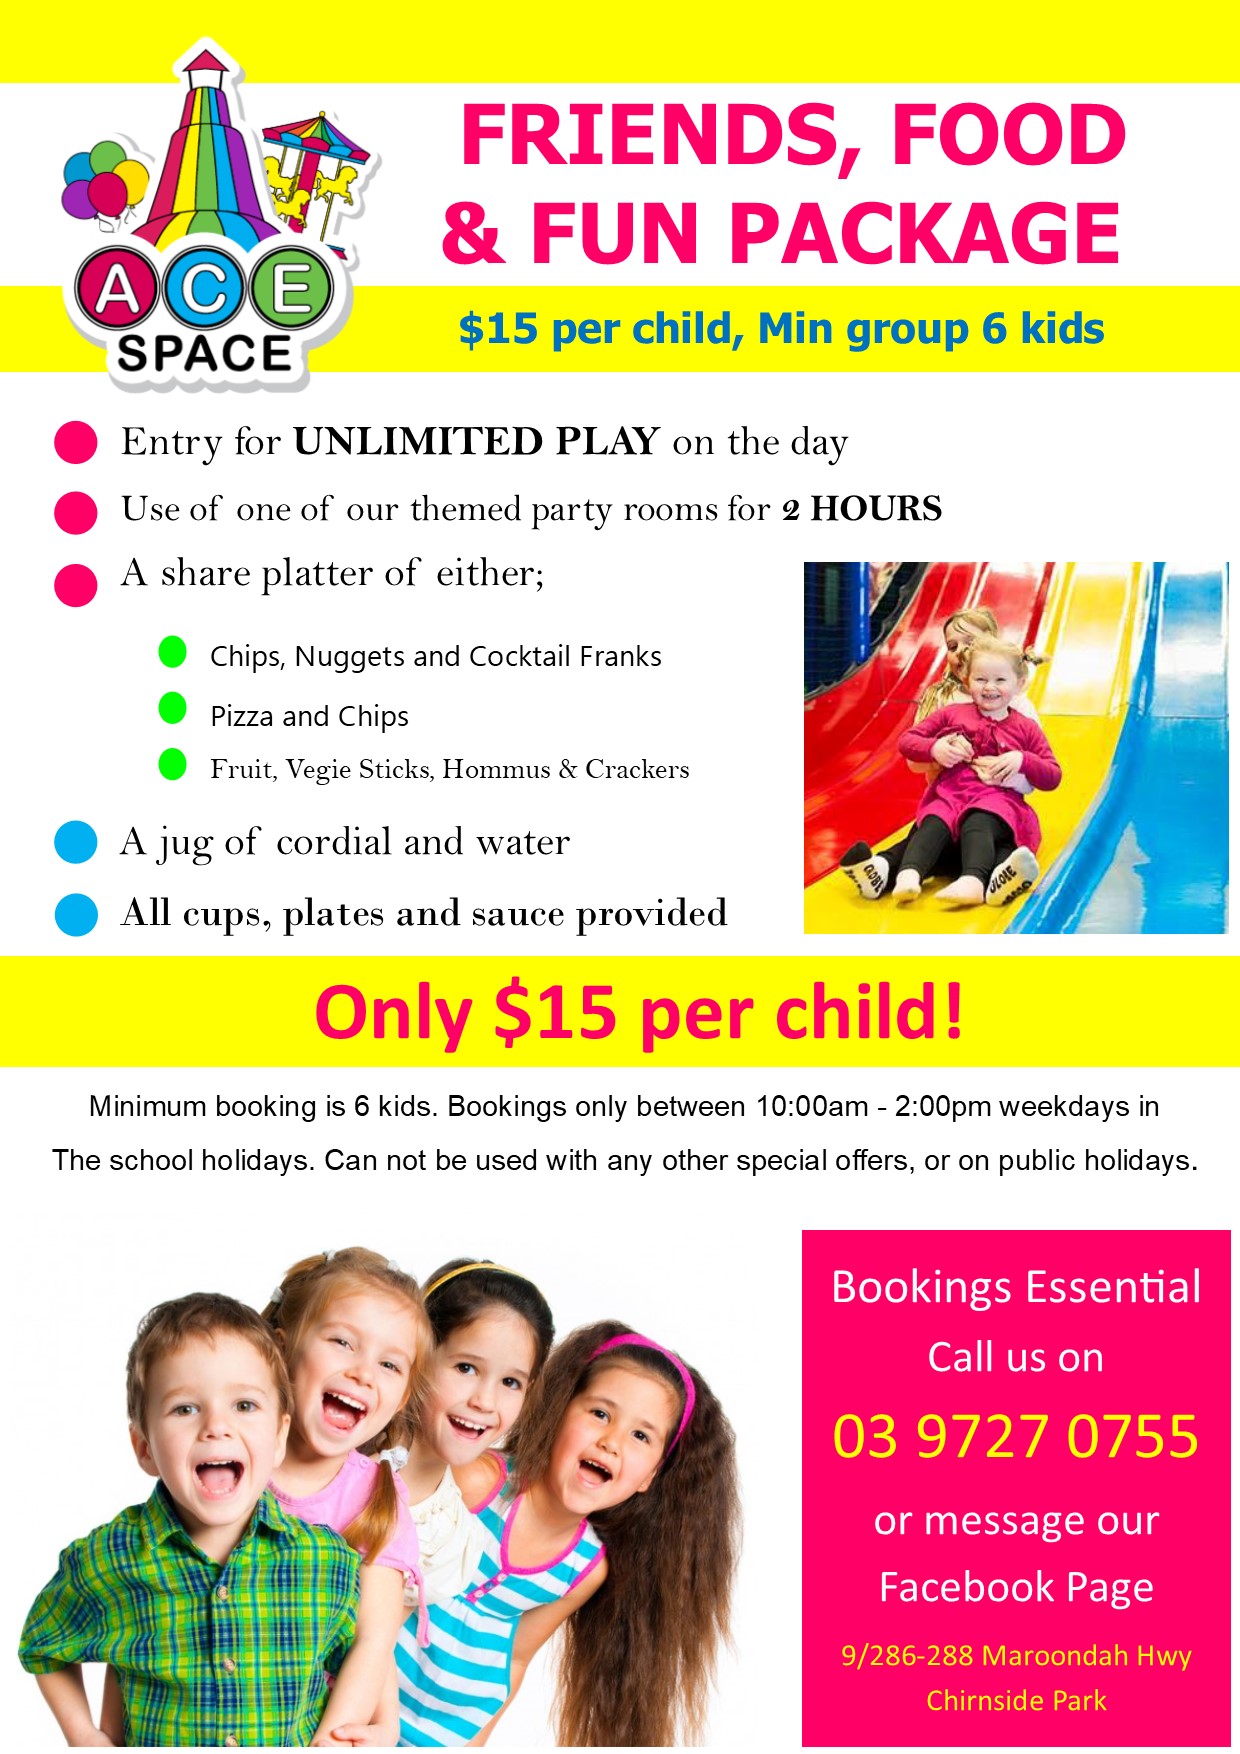 Friends Food and Fun Package 2019 school holiday